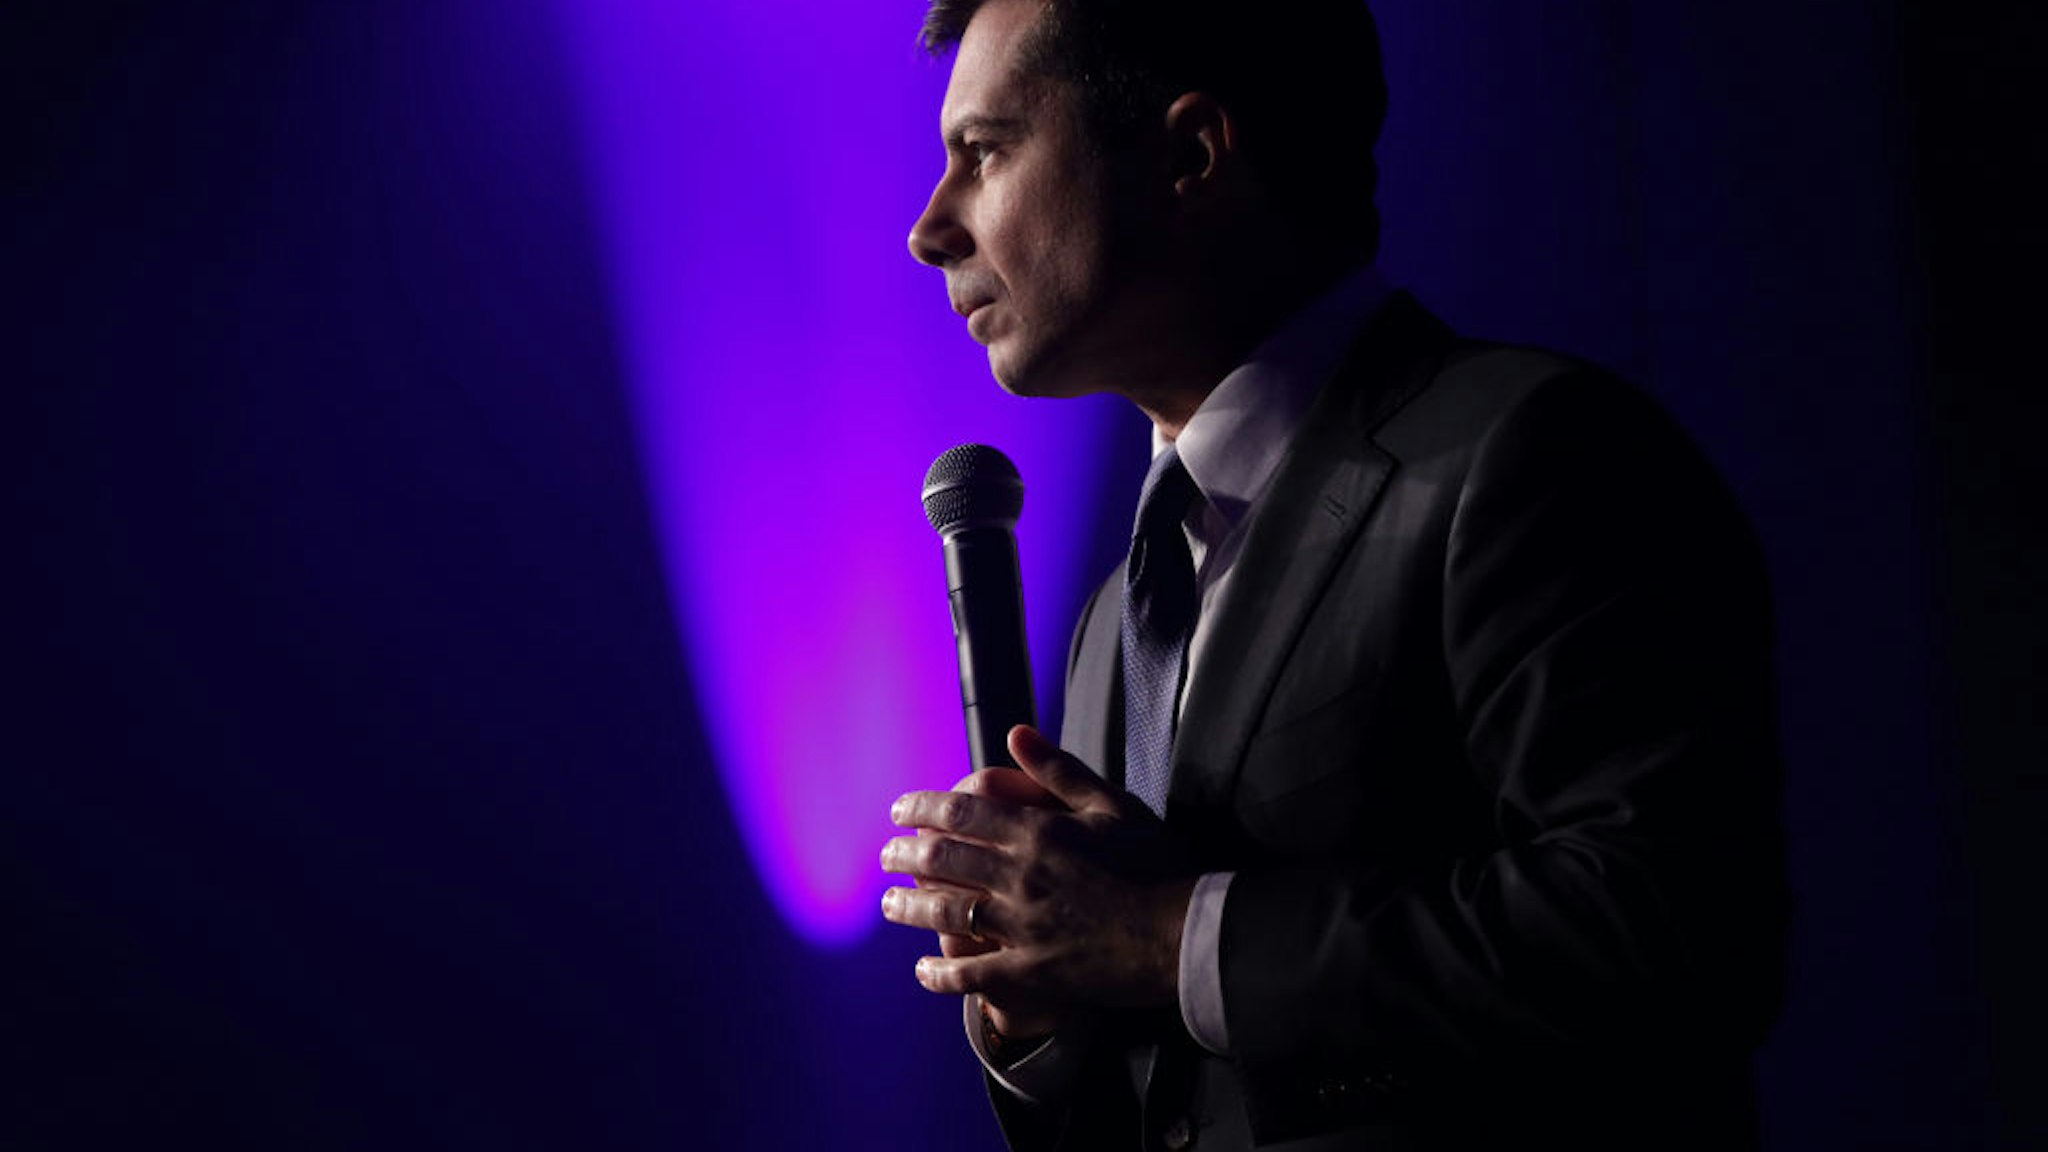 Democratic presidential candidate former South Bend, Indiana Mayor Pete Buttigieg speaks during the Clark County Democrats Kick Off to Caucus Gala at Tropicana Las Vegas February 15, 2020 in Las Vegas, Nevada.